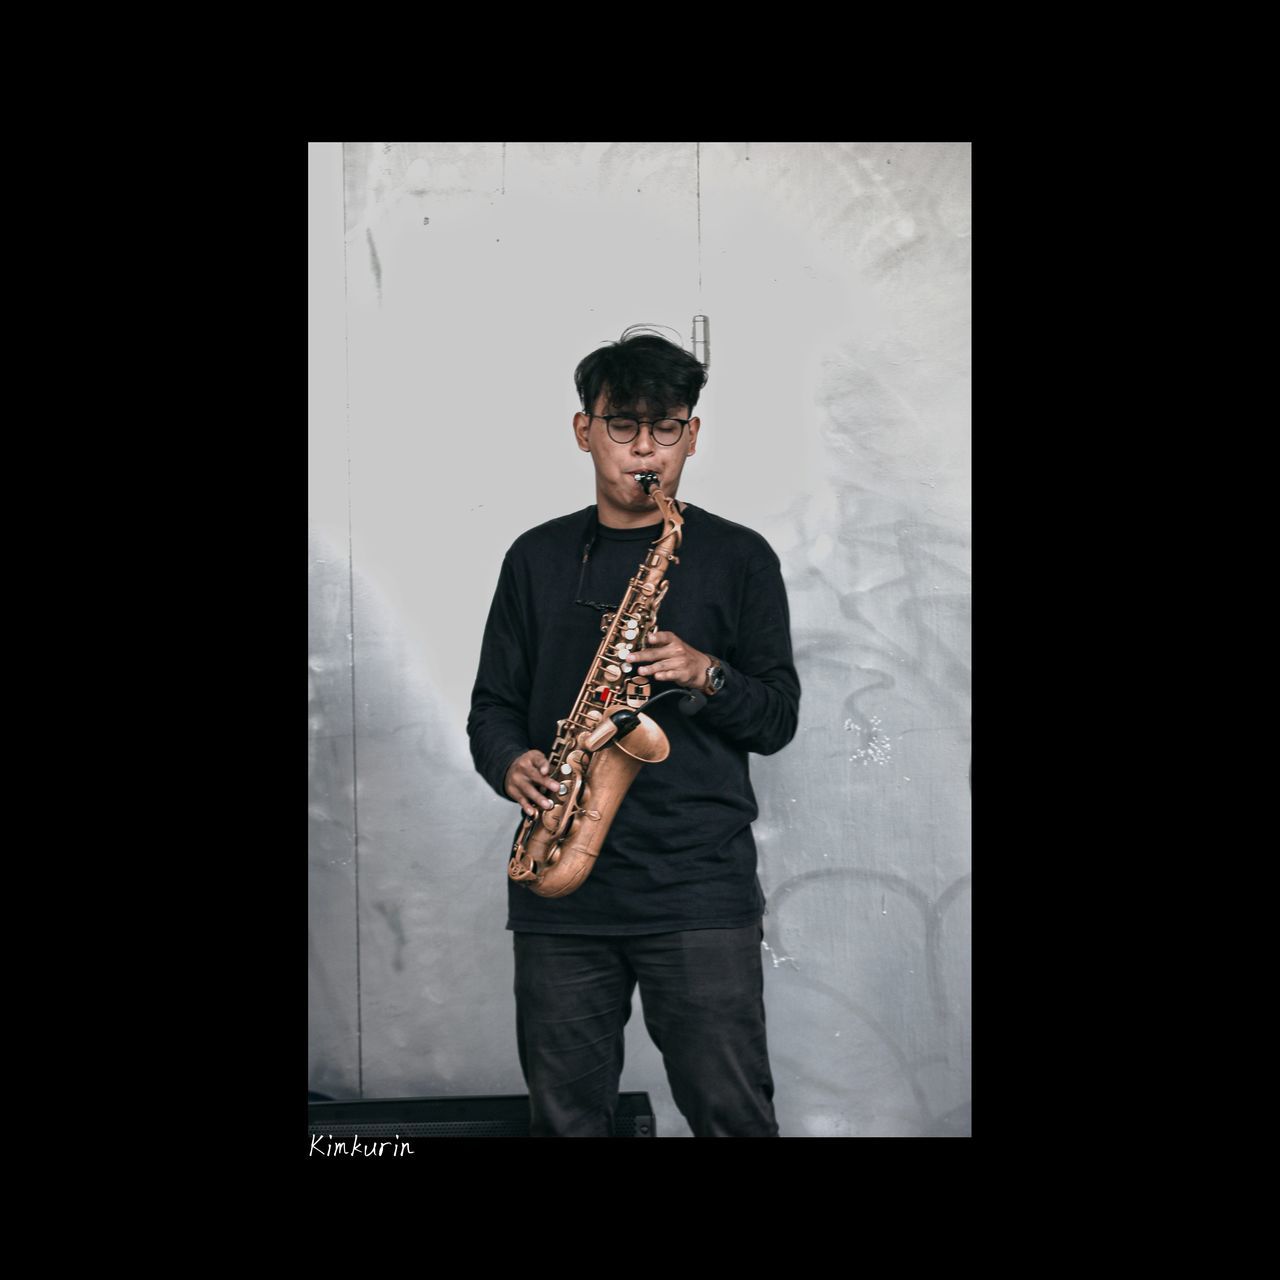 musical instrument, music, one person, musician, saxophone, woodwind instrument, arts culture and entertainment, performance, skill, men, adult, front view, indoors, holding, standing, wind instrument, copy space, musical equipment, guitar, saxophonist, person, young adult, black background, studio shot